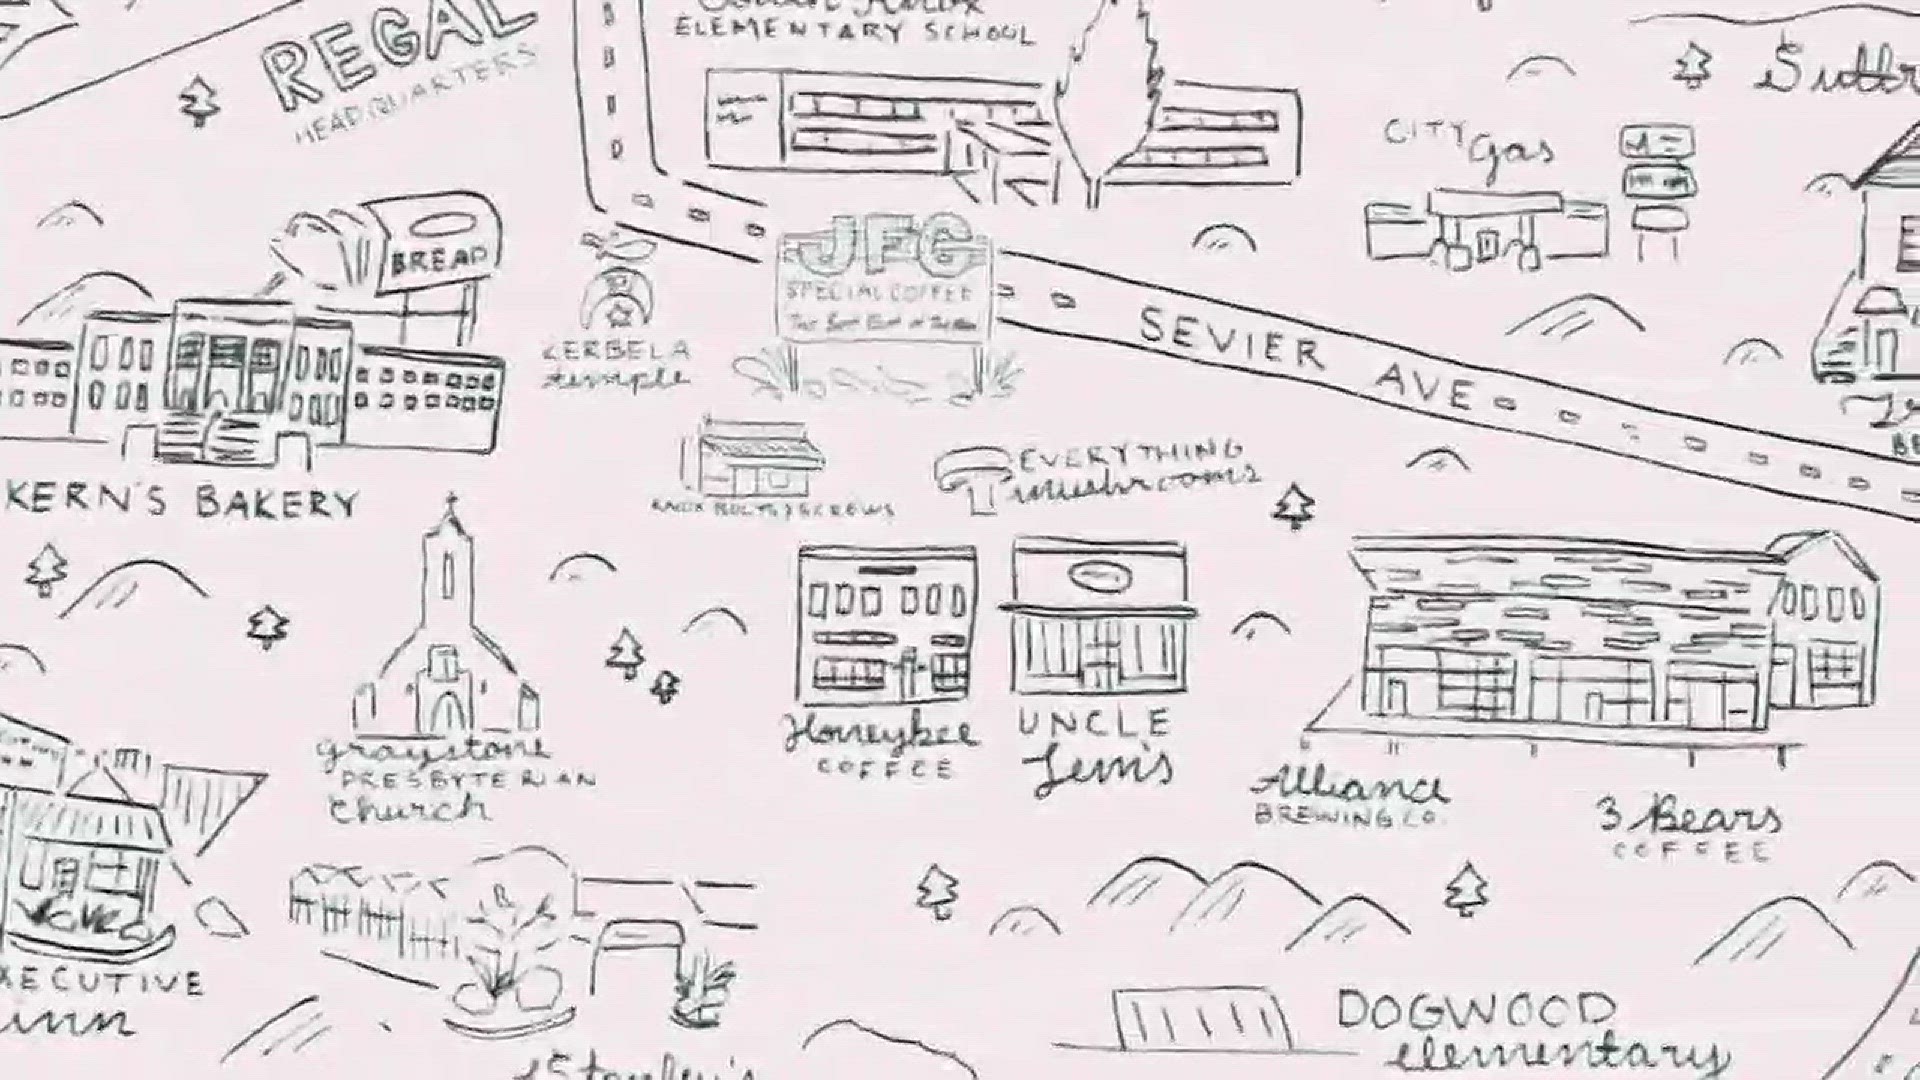 Artist makes map to navigate the city of Knoxville.